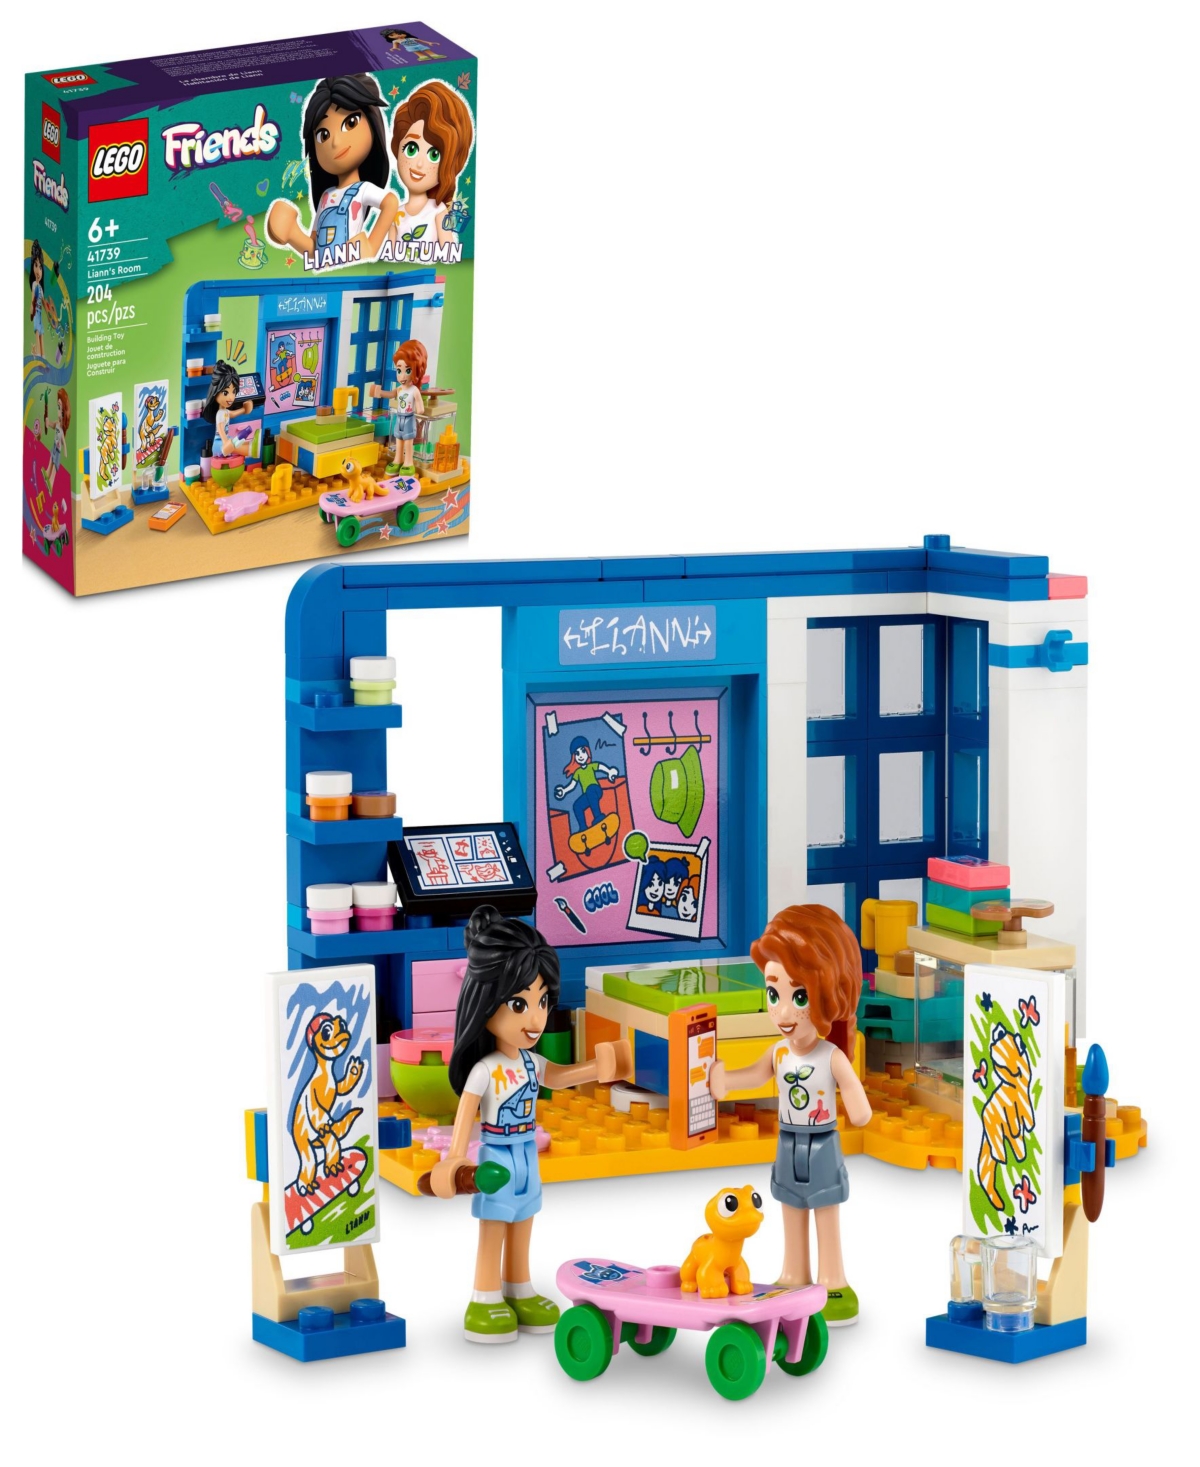 Lego Friends Liann's Room 41739 Toy Building Set With Liann, Autumn And Gecko Figures In Multicolor